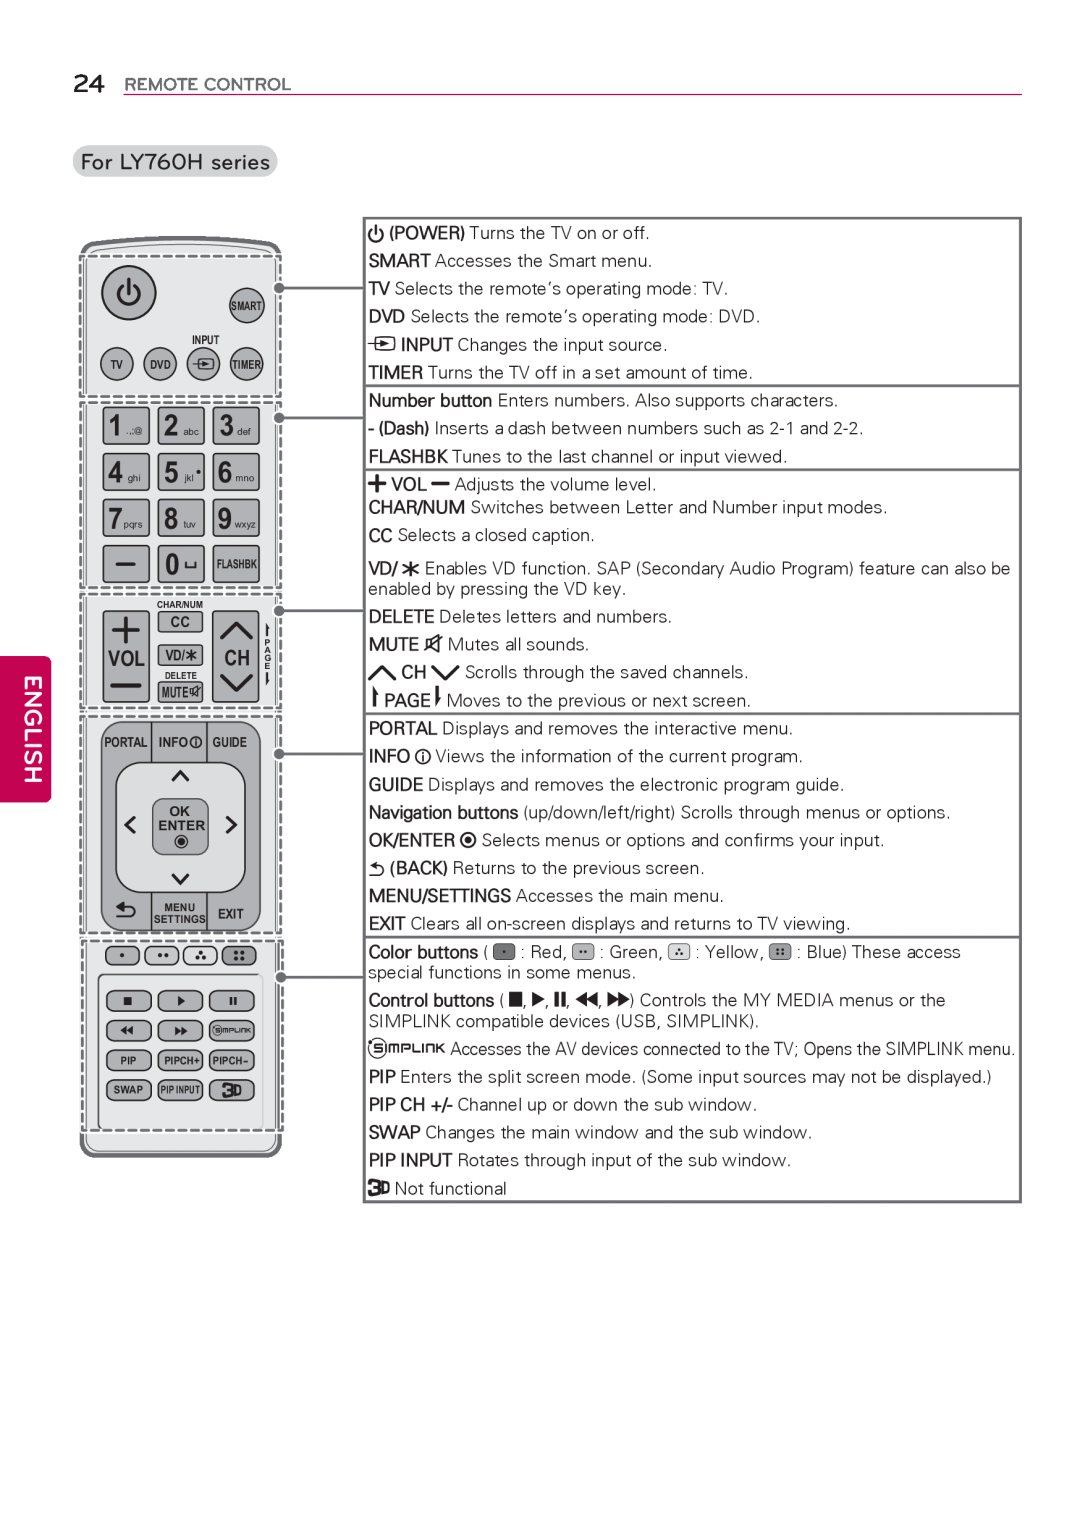 LG Electronics 39LY750H, 32LY750H, 55LY750H, 42LY750H, 47LY750H English, For LY760H series, Vol Vd/ Ch A, Remote Control 